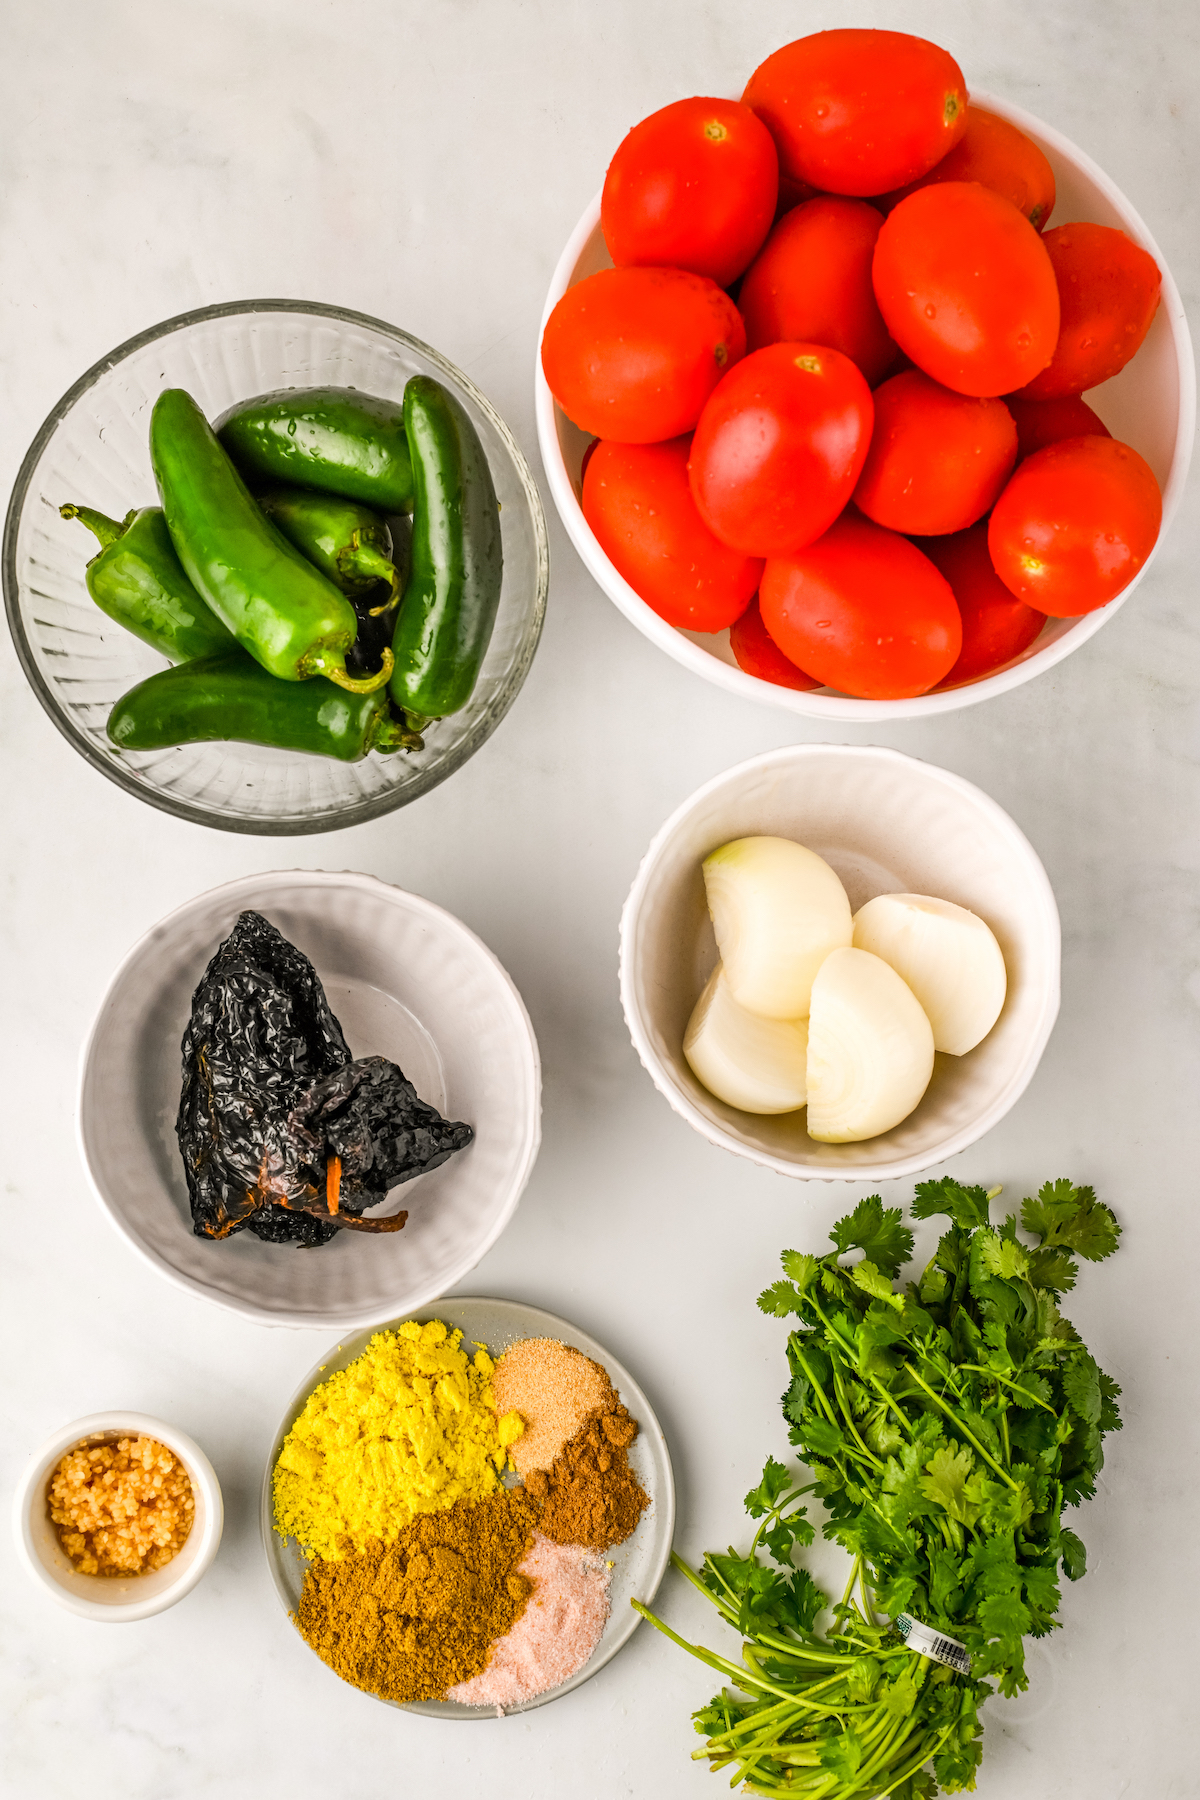 Ingredients for the salsa arranged in bowls on a countertop.